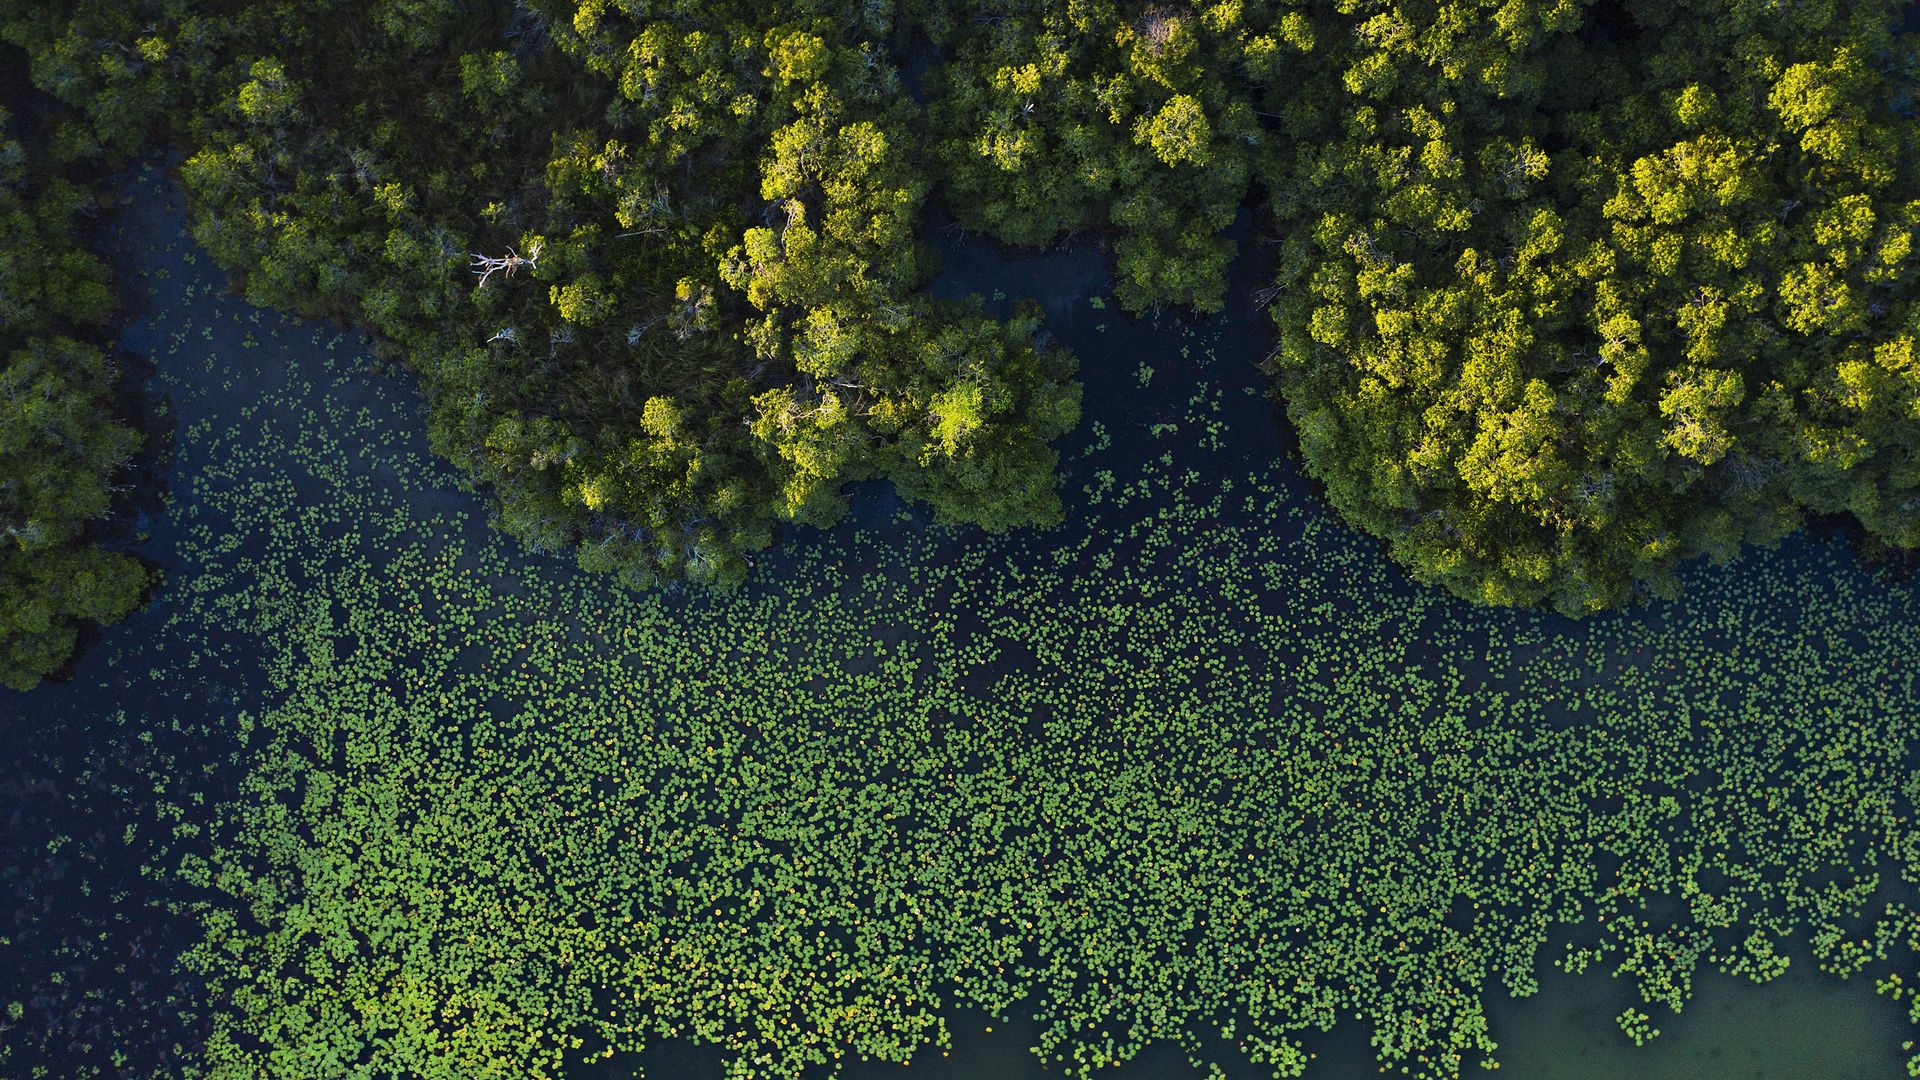 Aerial view of red mangrove forests along San Pedro Mártir River in Mexico.